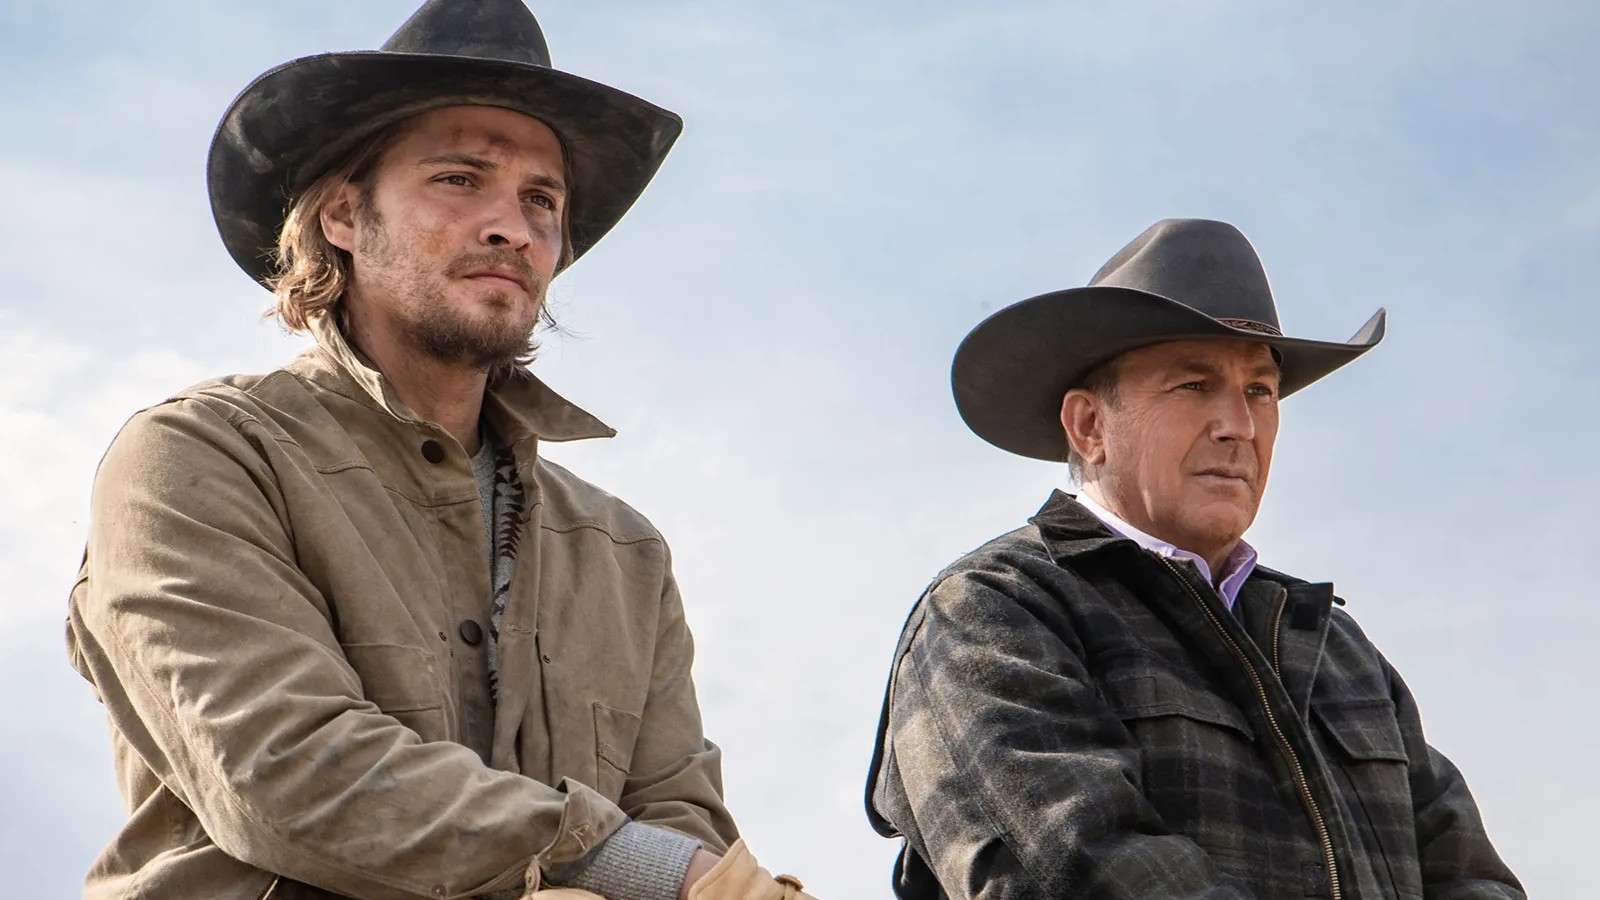 Luke Grimes and Kevin Costner on horseback in Yellowstone.